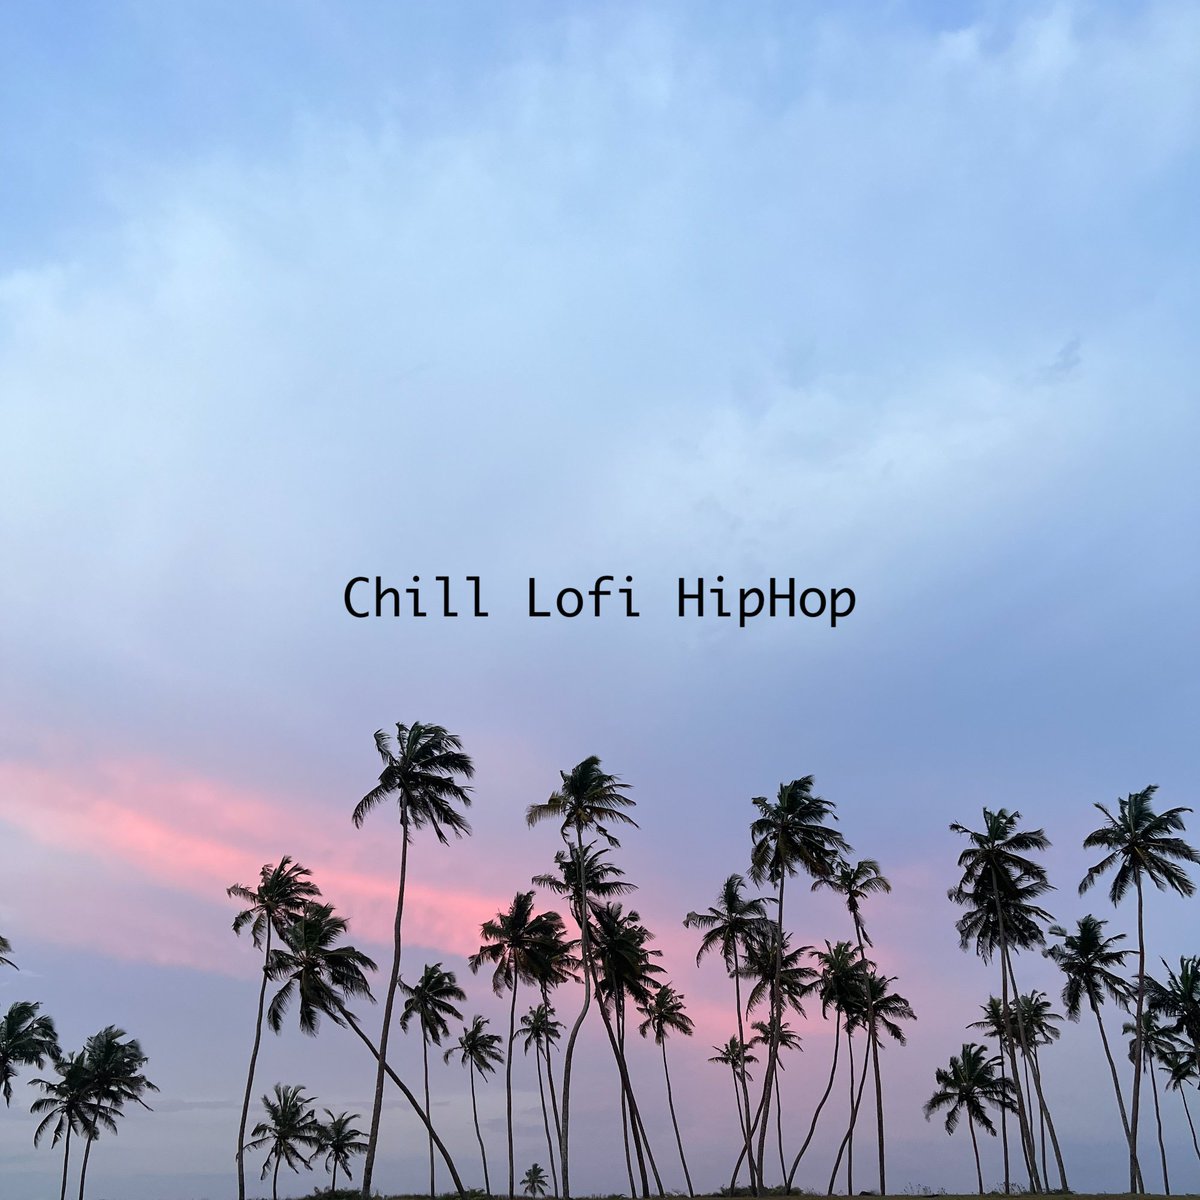 The 'Chill Lofi HipHop' playlist updated! This update features;
@DigiJay_
@lofiriderz
@jeffs1liners
@ProducerChamon
@mr_tav
@musicbystym
@TravellingBeat1
@sayharaem
@namesasflowers
@pidovibes
 and many more

open.spotify.com/playlist/1GMkt…